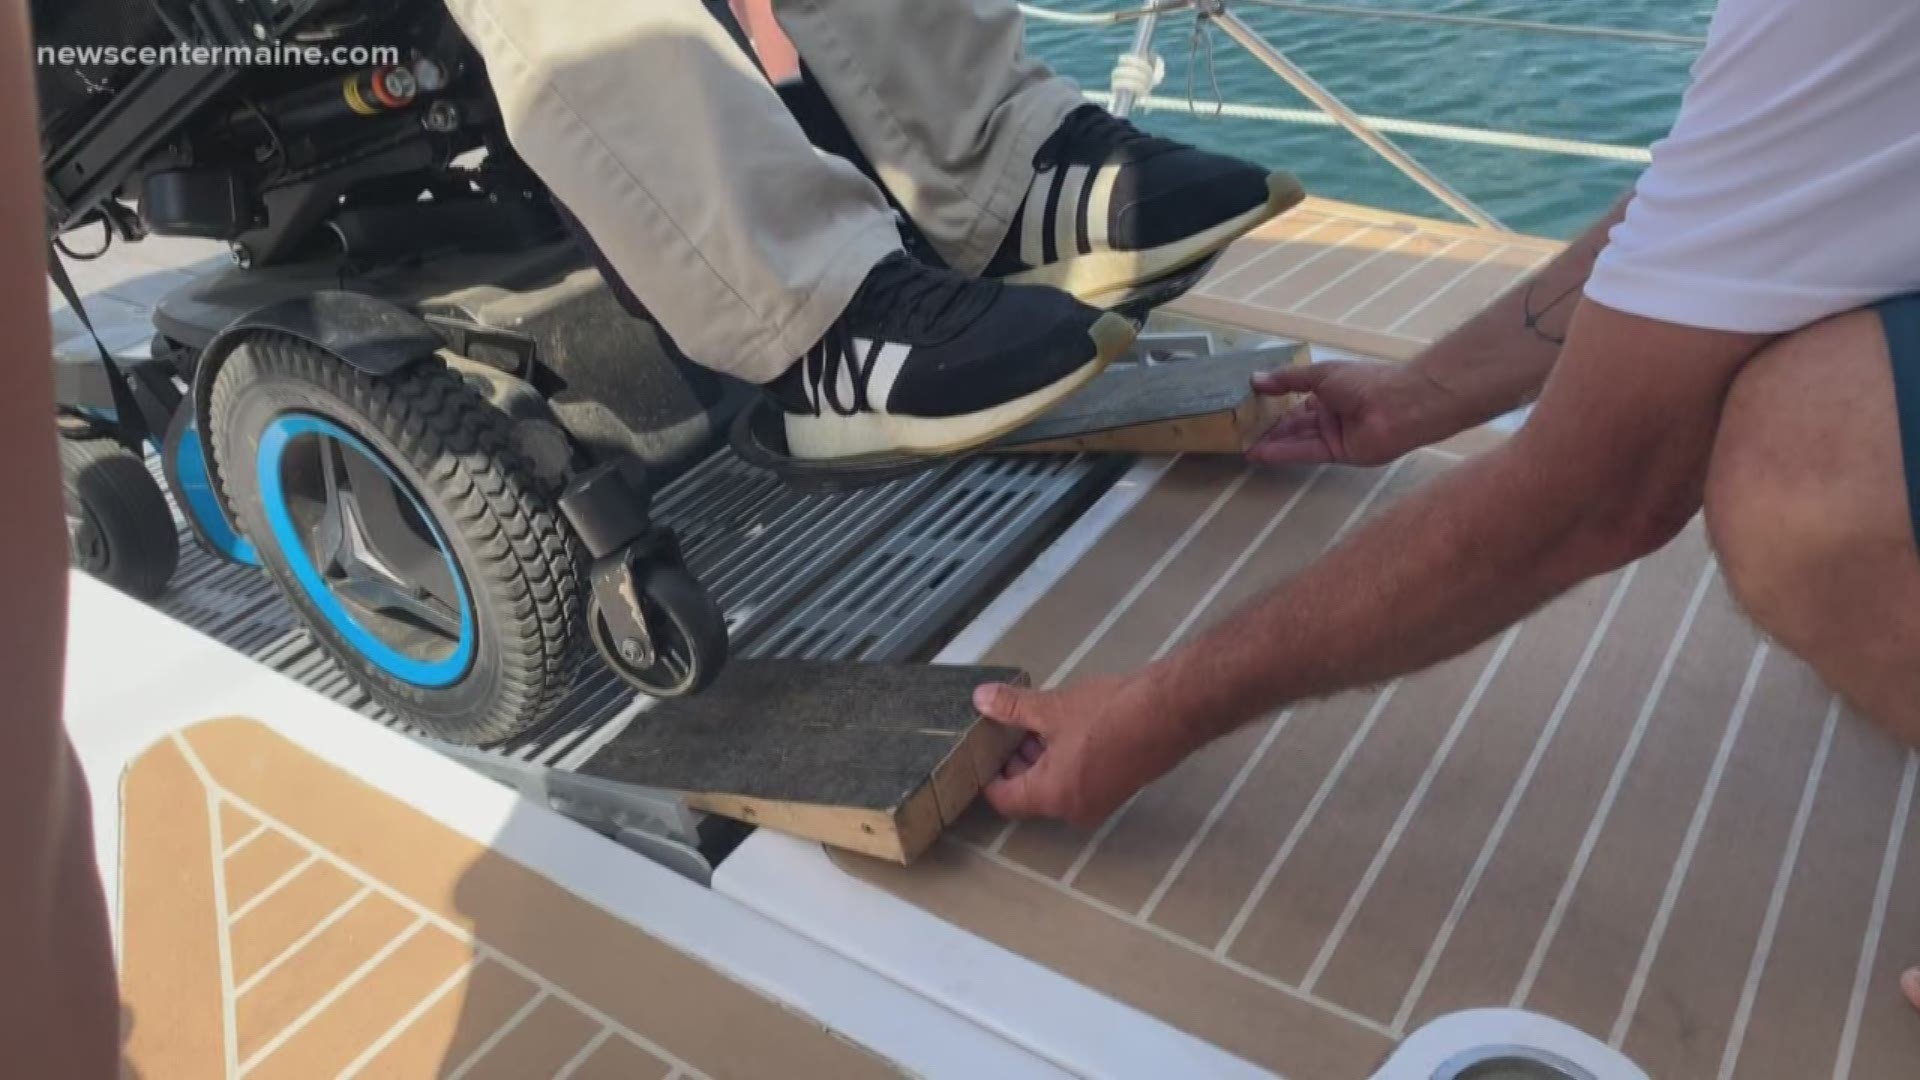 The Impossible Dream travels the eastern seaboard giving sailing rides to people with disabilities.